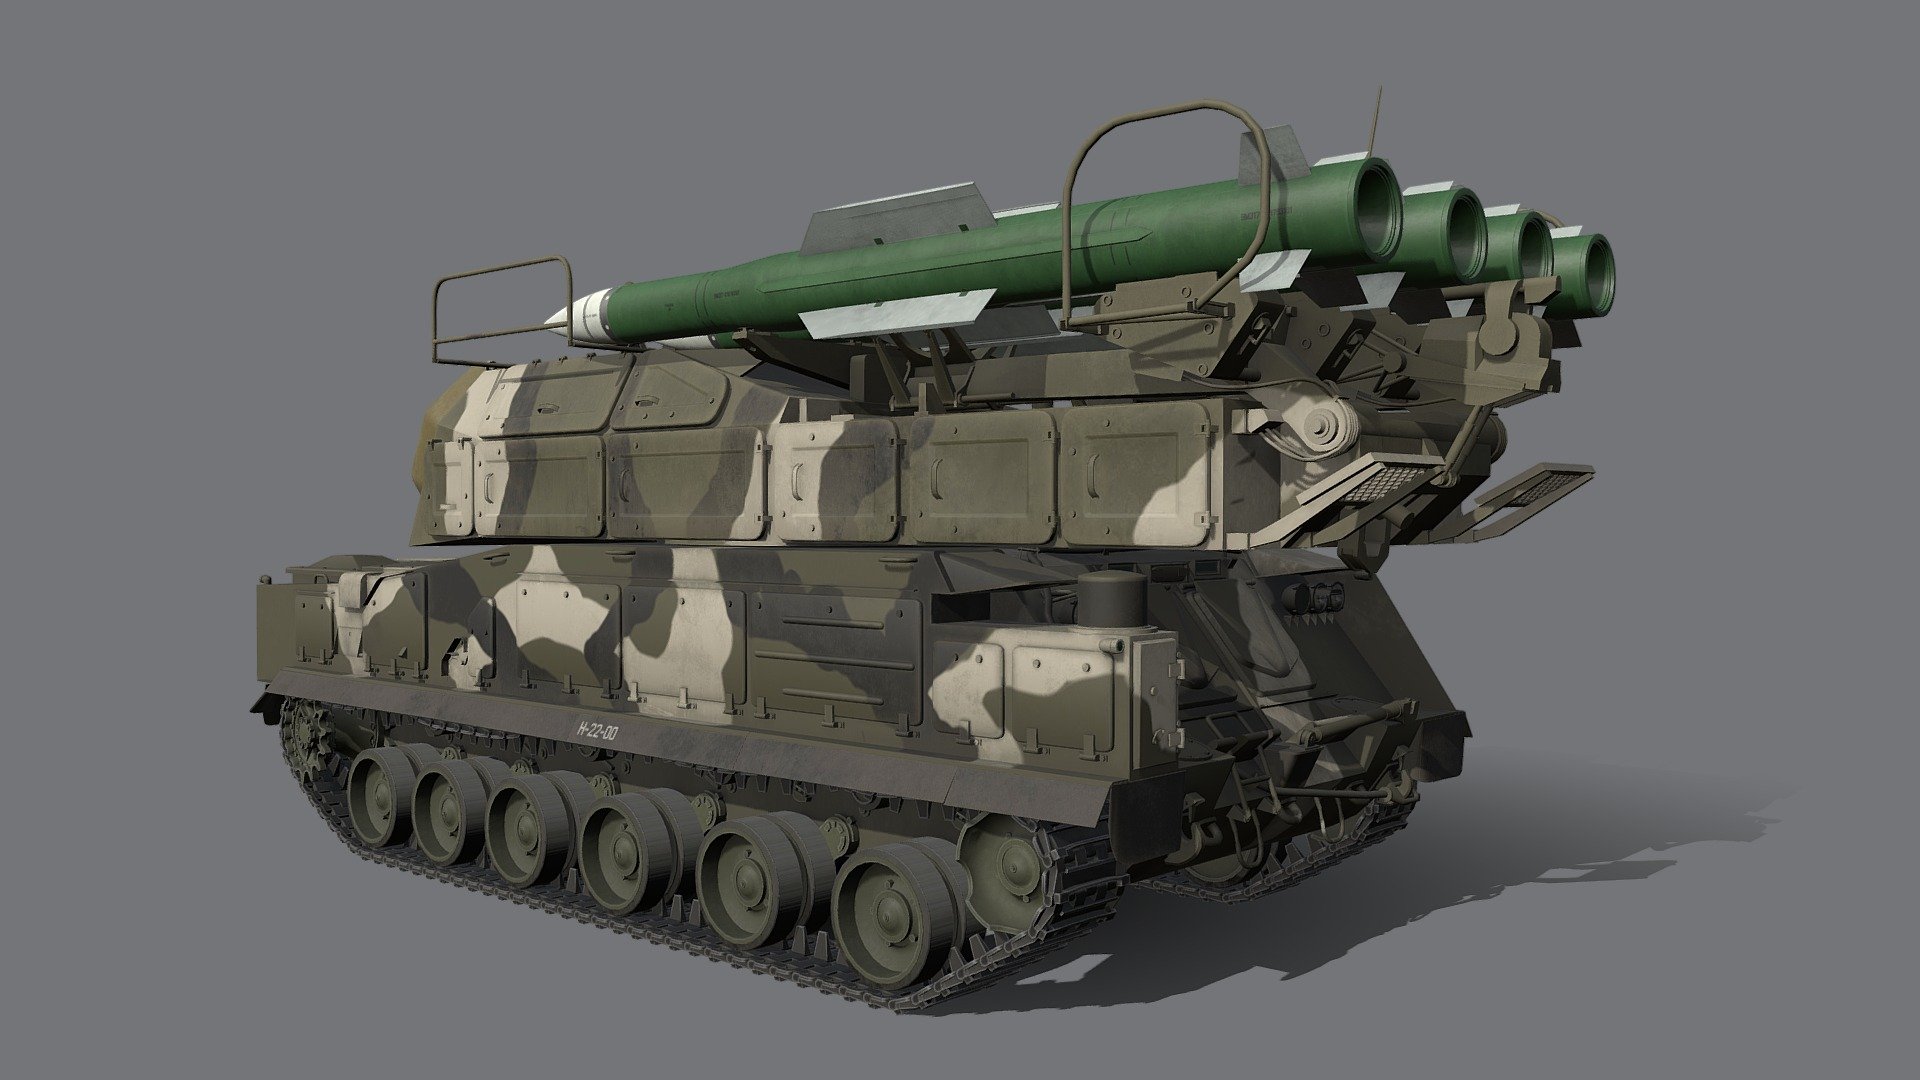 The Buk-M2 (NATO name SA-17 Grizzly, Russian name 9K317) is a Russian-made mobile medium-range surface-to-air missile (SAM) system designed to defend field troops and logistical installations against air threats. SA-17 Grizzly is an upgraded version of the proven Buk-M1 mobile air defense system and retains its main features. It defeats strategic and tactical aircraft, tactical ballistic missiles, cruise missiles, air-launched missiles, guided aerial bombs and helicopters, including hovering rotorcraft, in the presence of heavy electronic countermeasures and under intense enemy fire. The Buk-M2 can engage a wide variety of targets from aircraft to missiles flying at an altitude of between 10 and 24,000 m at a maximum range of 50 km in given conditions. The SA-17 Grizzly can engage simultaneously up to 24 targets flying from any direction 3d model